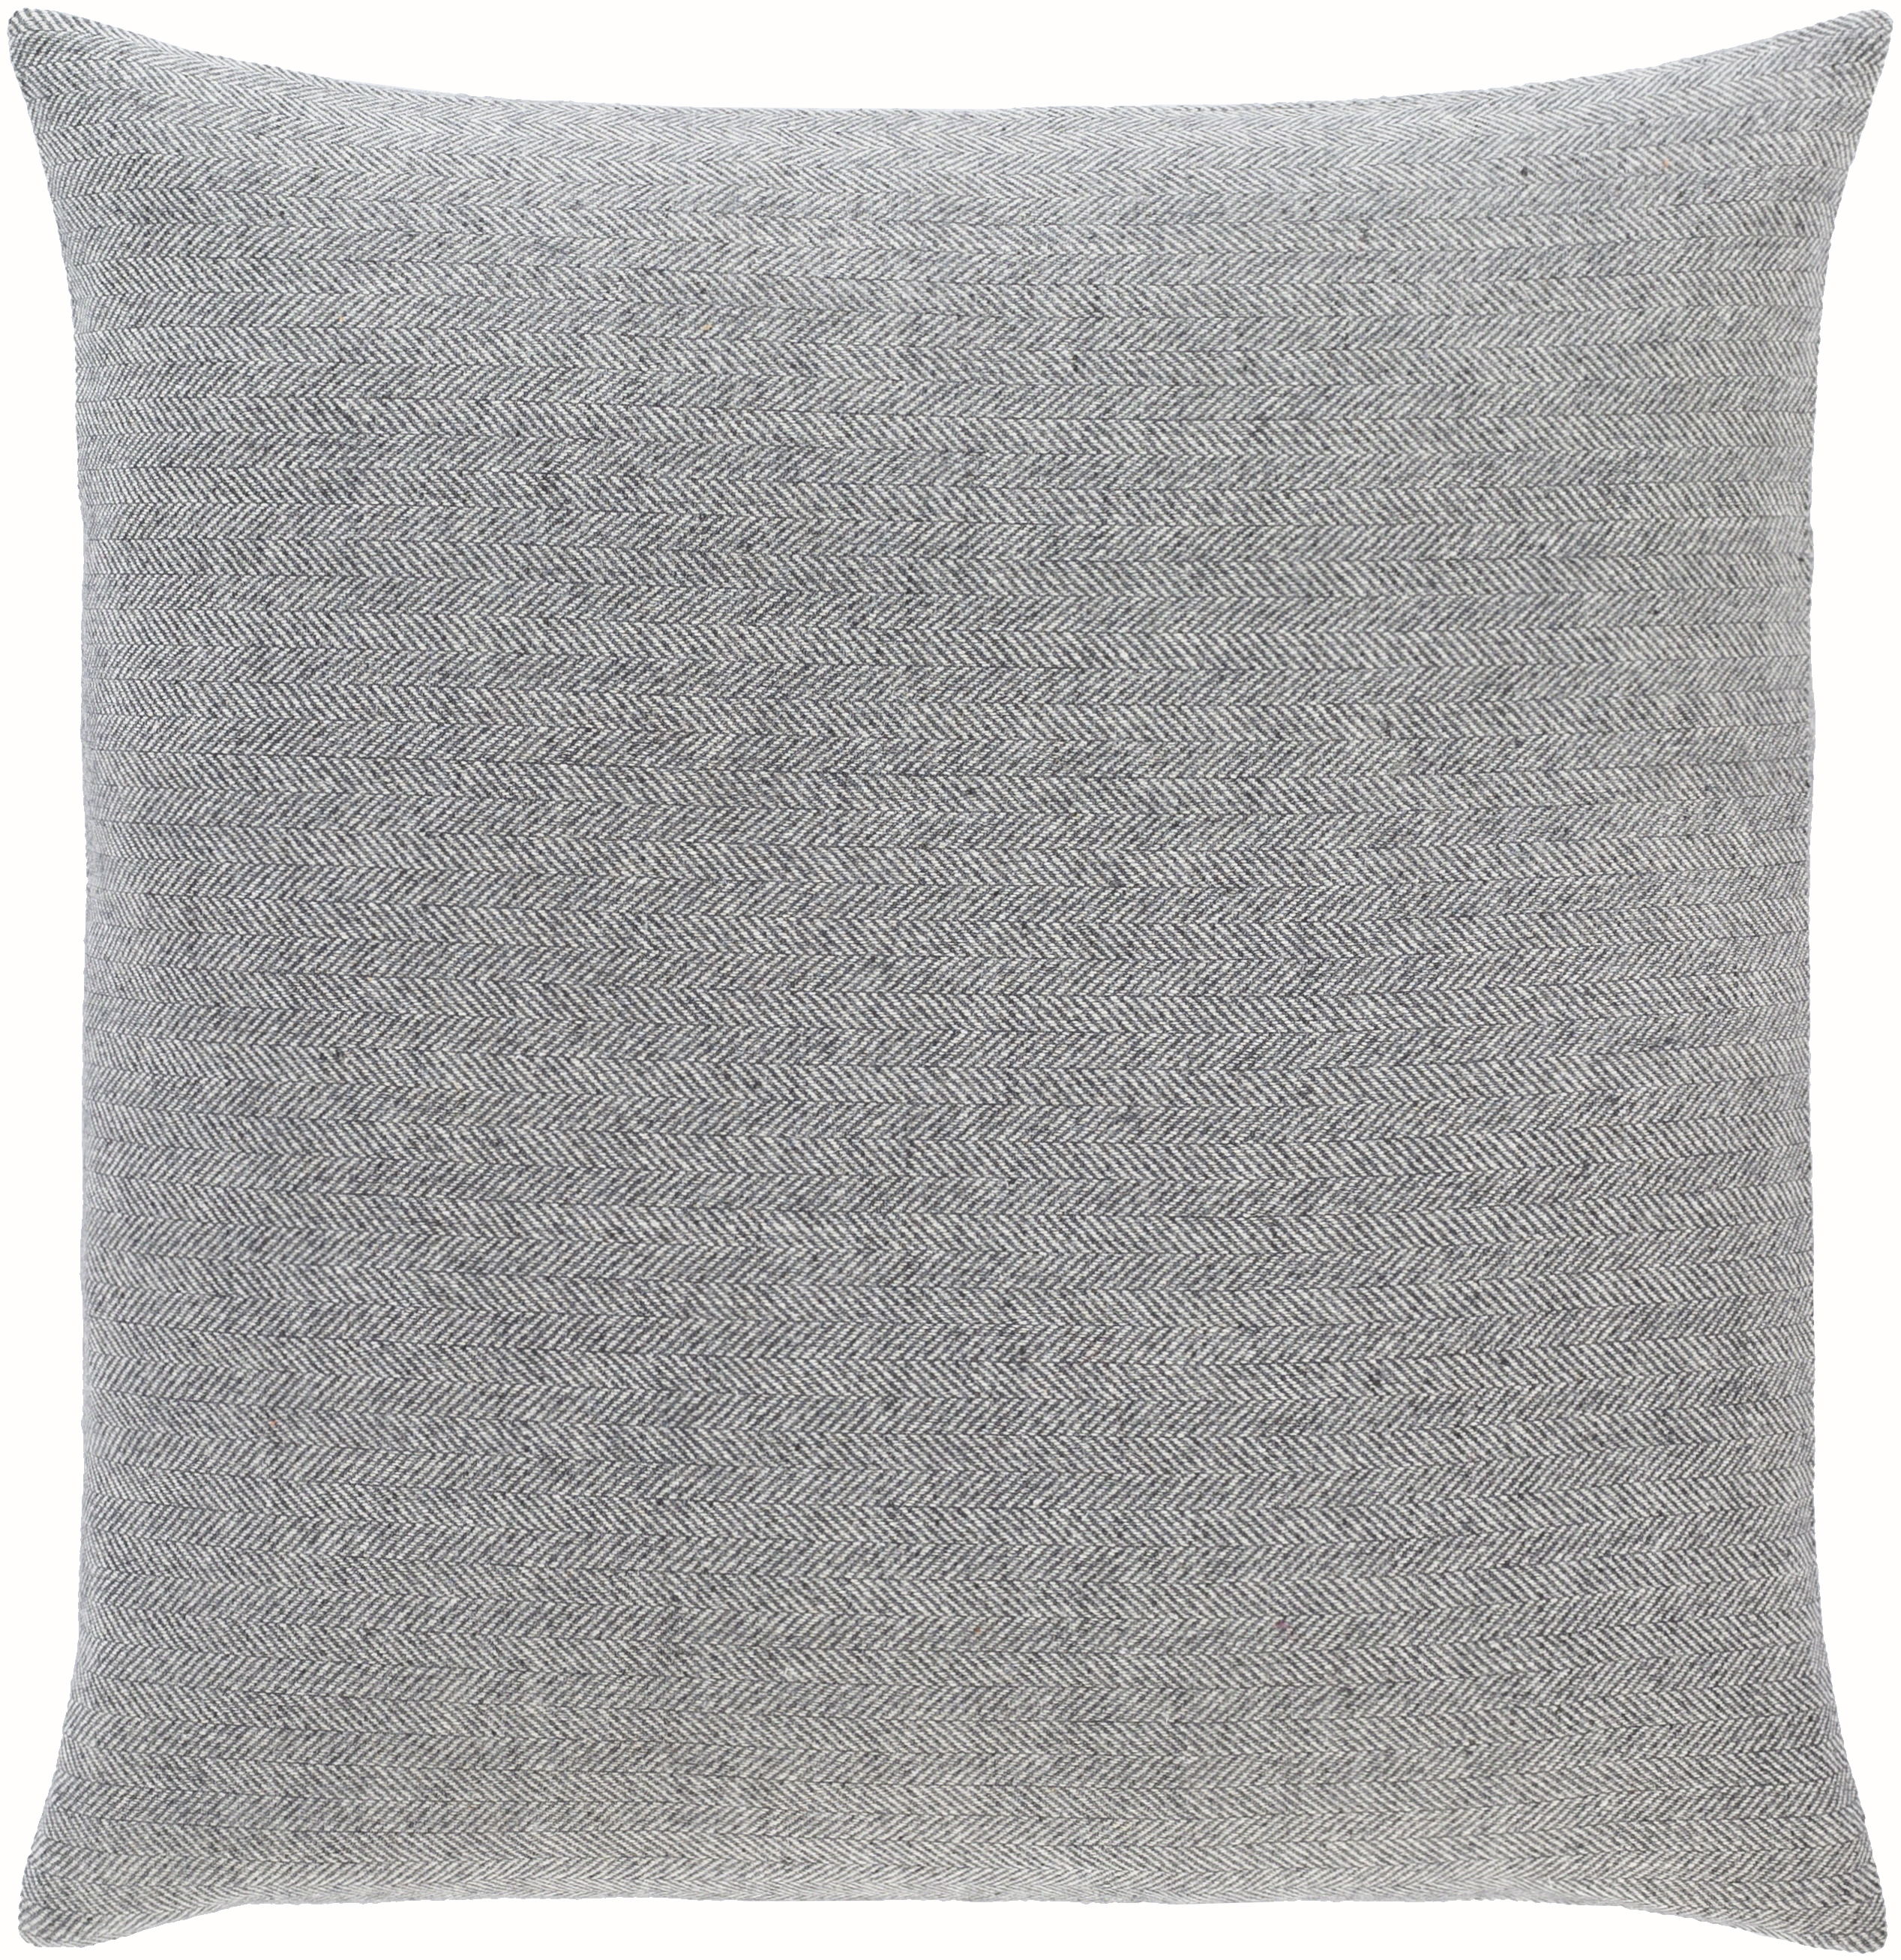 Brenley Pillow, 20" x 20", Charcoal & Ivory - Image 0